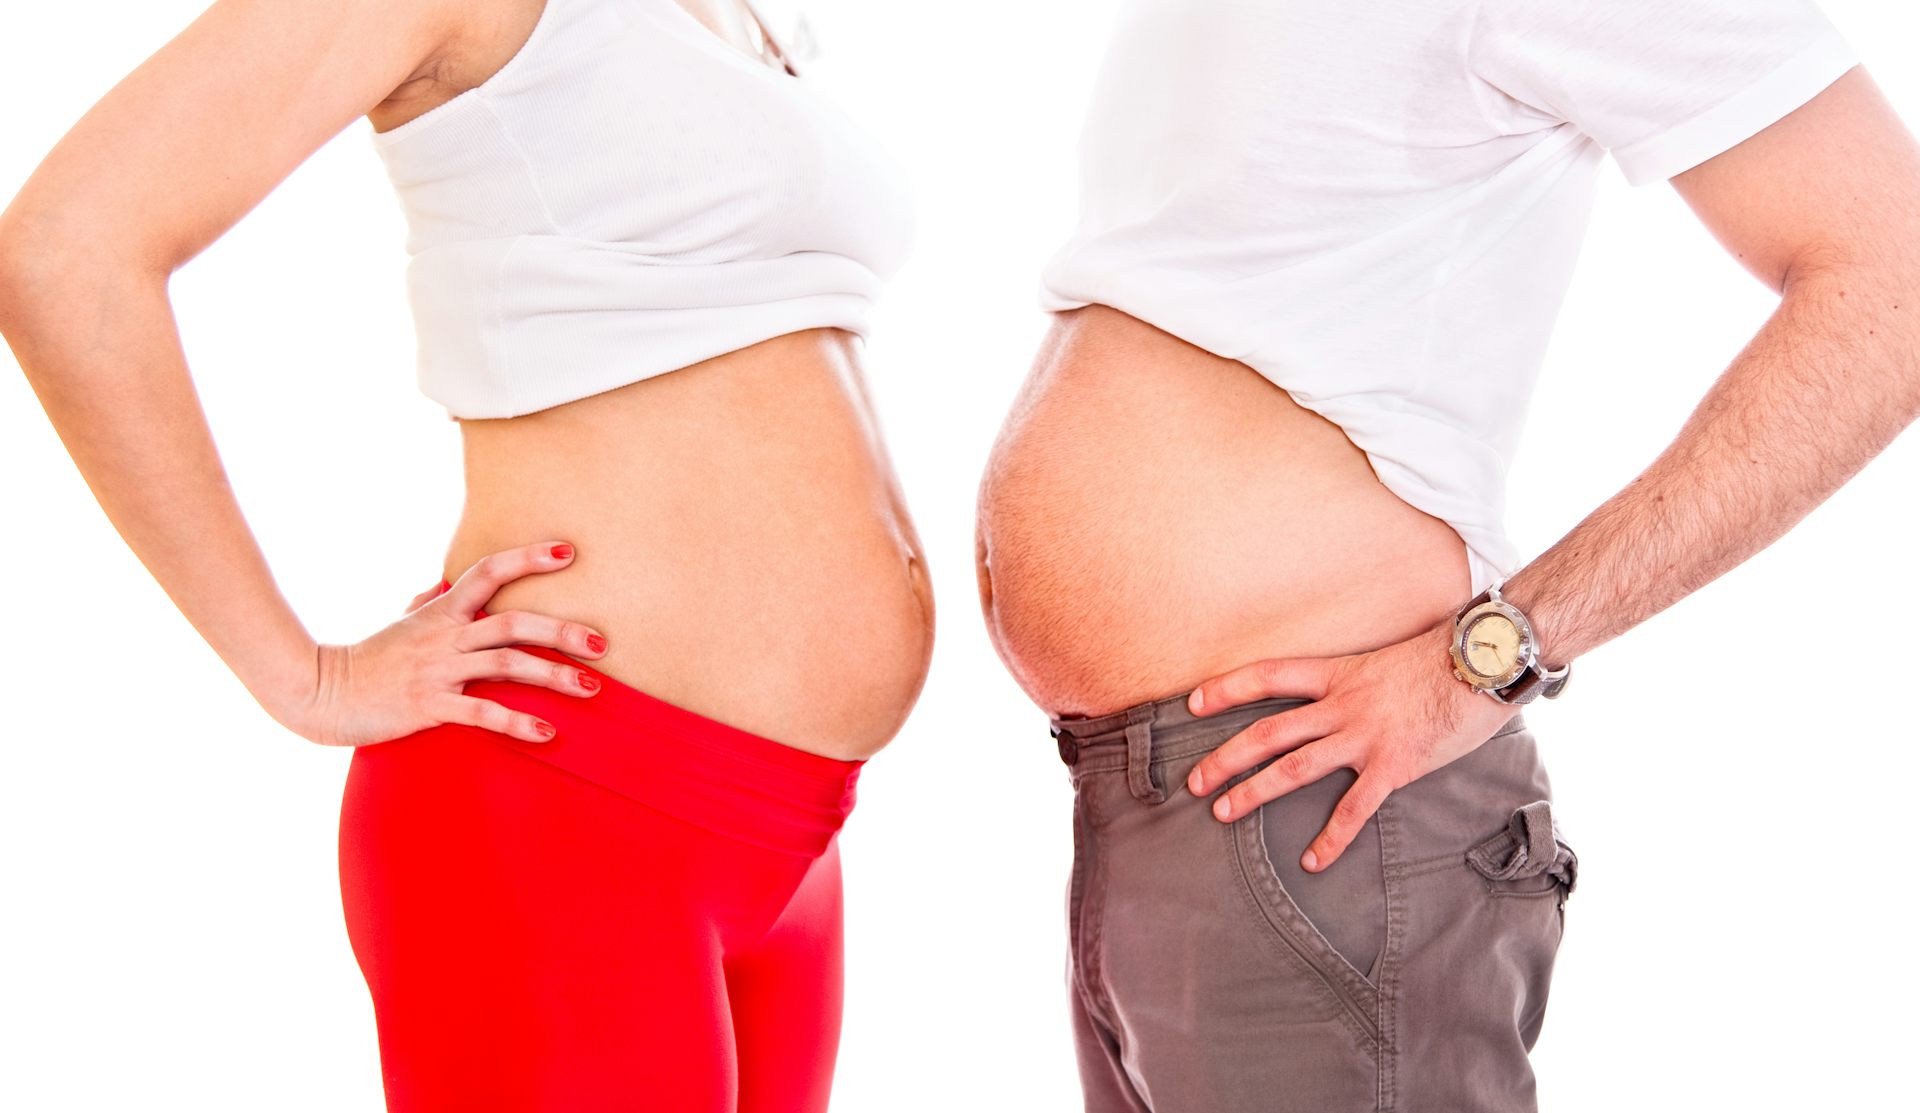 Couvade syndrome why some men develop signs of pregnancy image pic